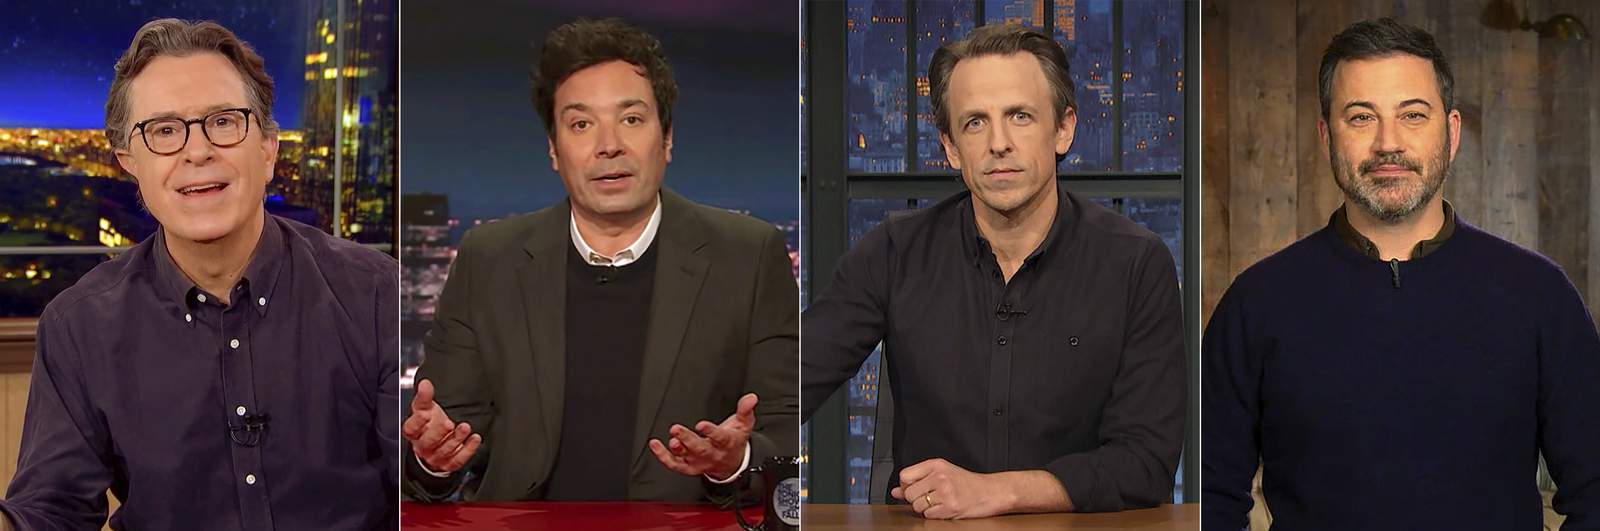 Late-night hosts react with shock, anger to Capitol attack